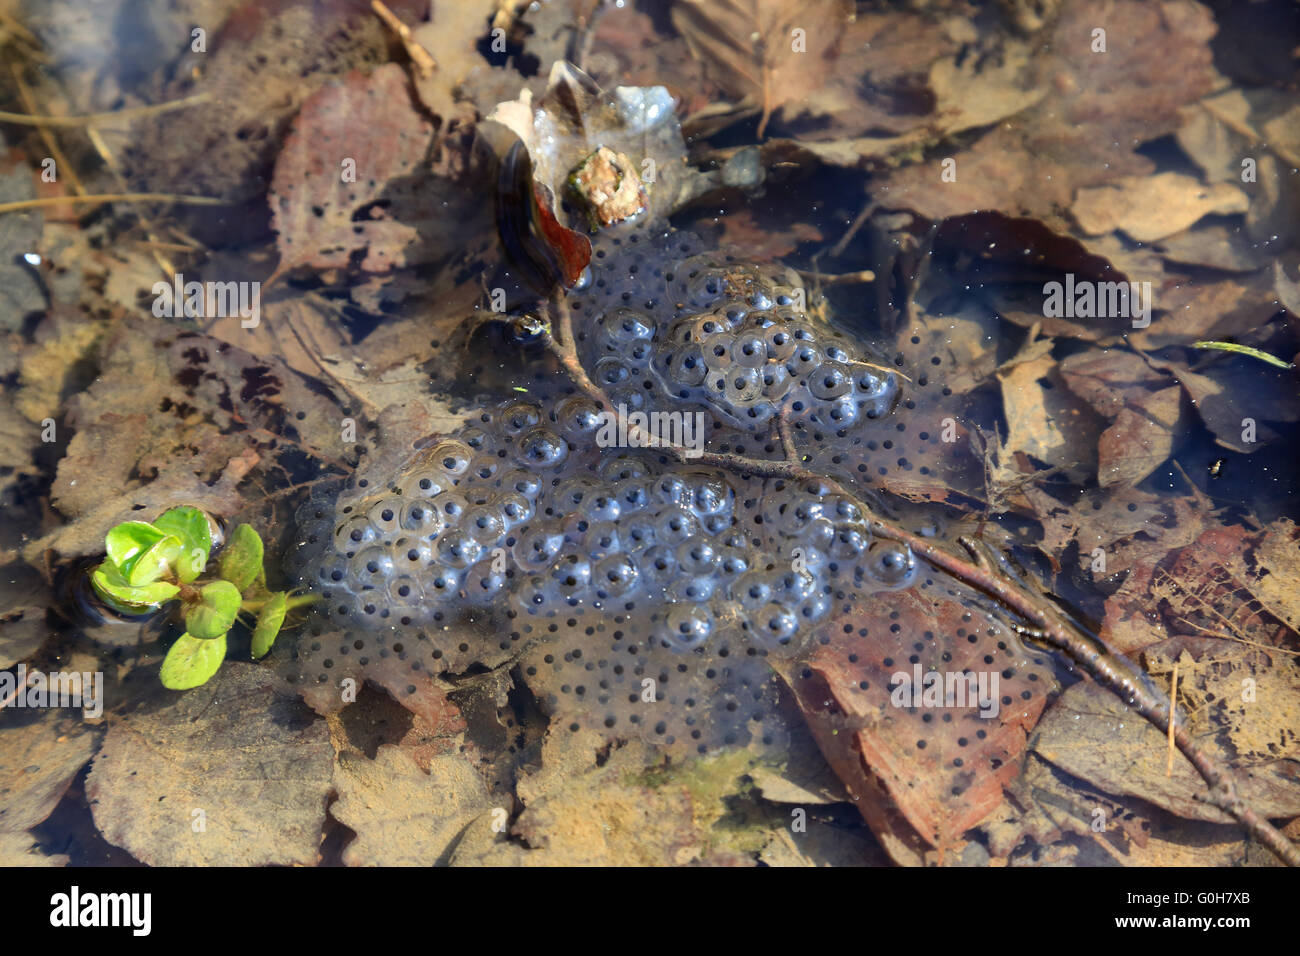 Frog spawn in the pool Stock Photo